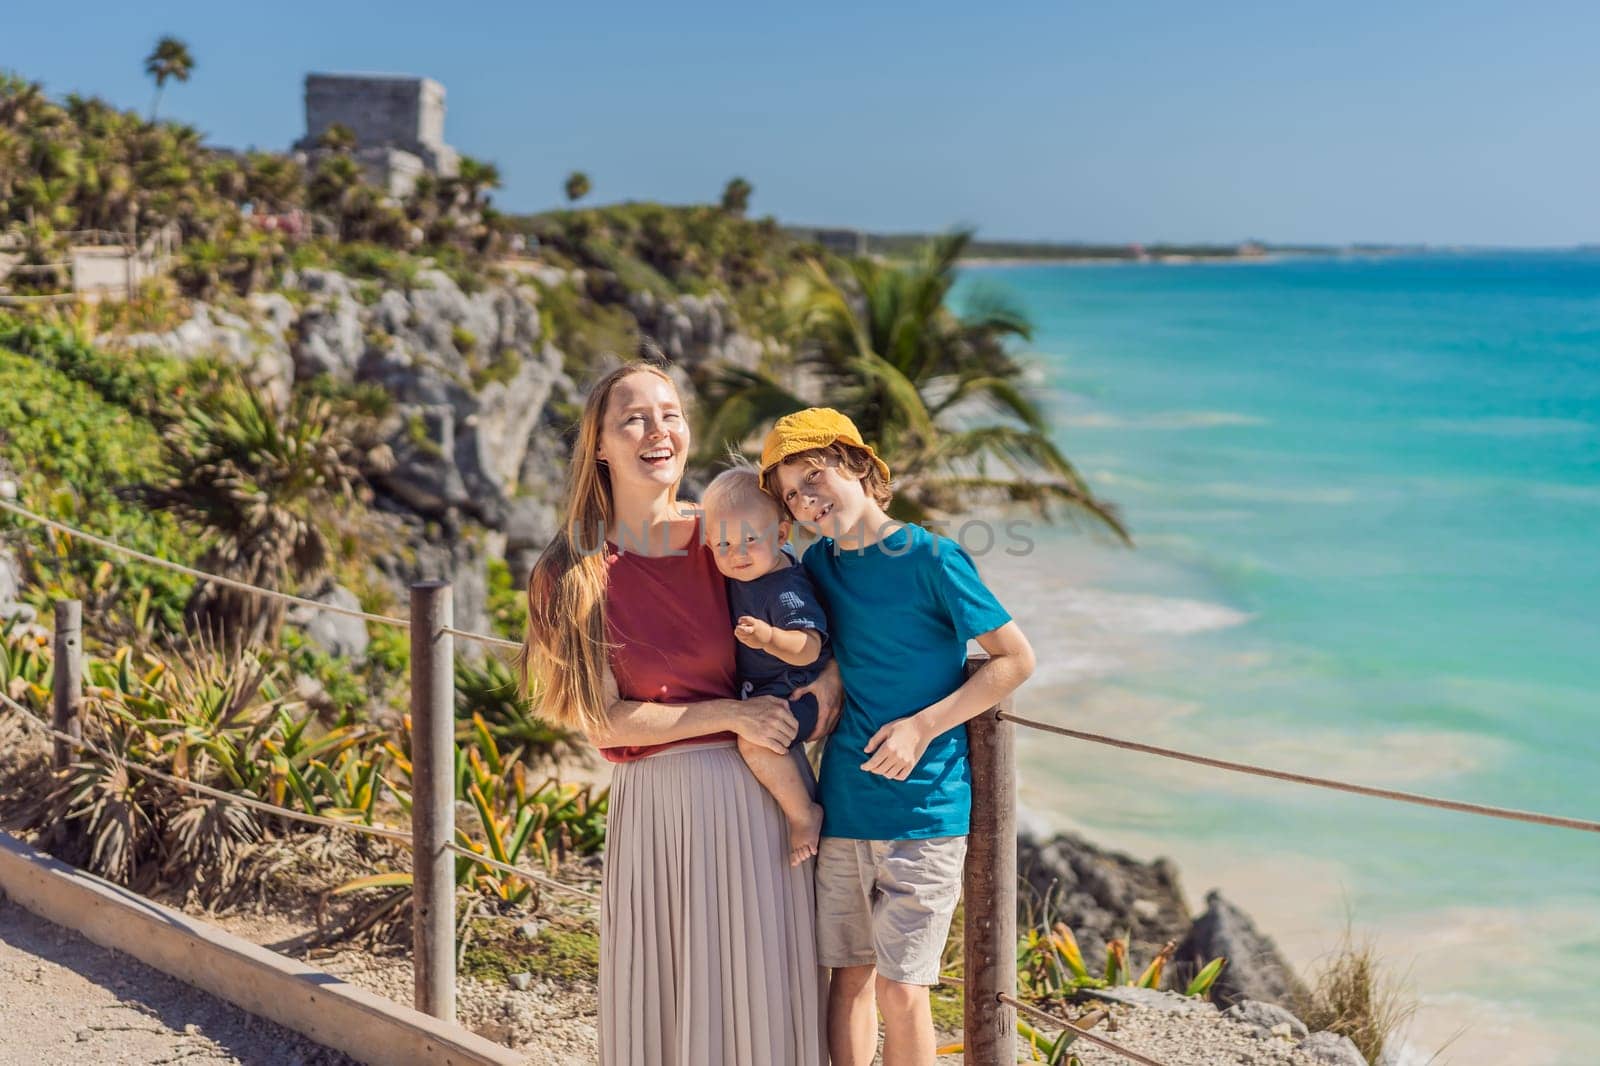 Mother and two sons tourists enjoying the view Pre-Columbian Mayan walled city of Tulum, Quintana Roo, Mexico, North America, Tulum, Mexico. El Castillo - castle the Mayan city of Tulum main temple.